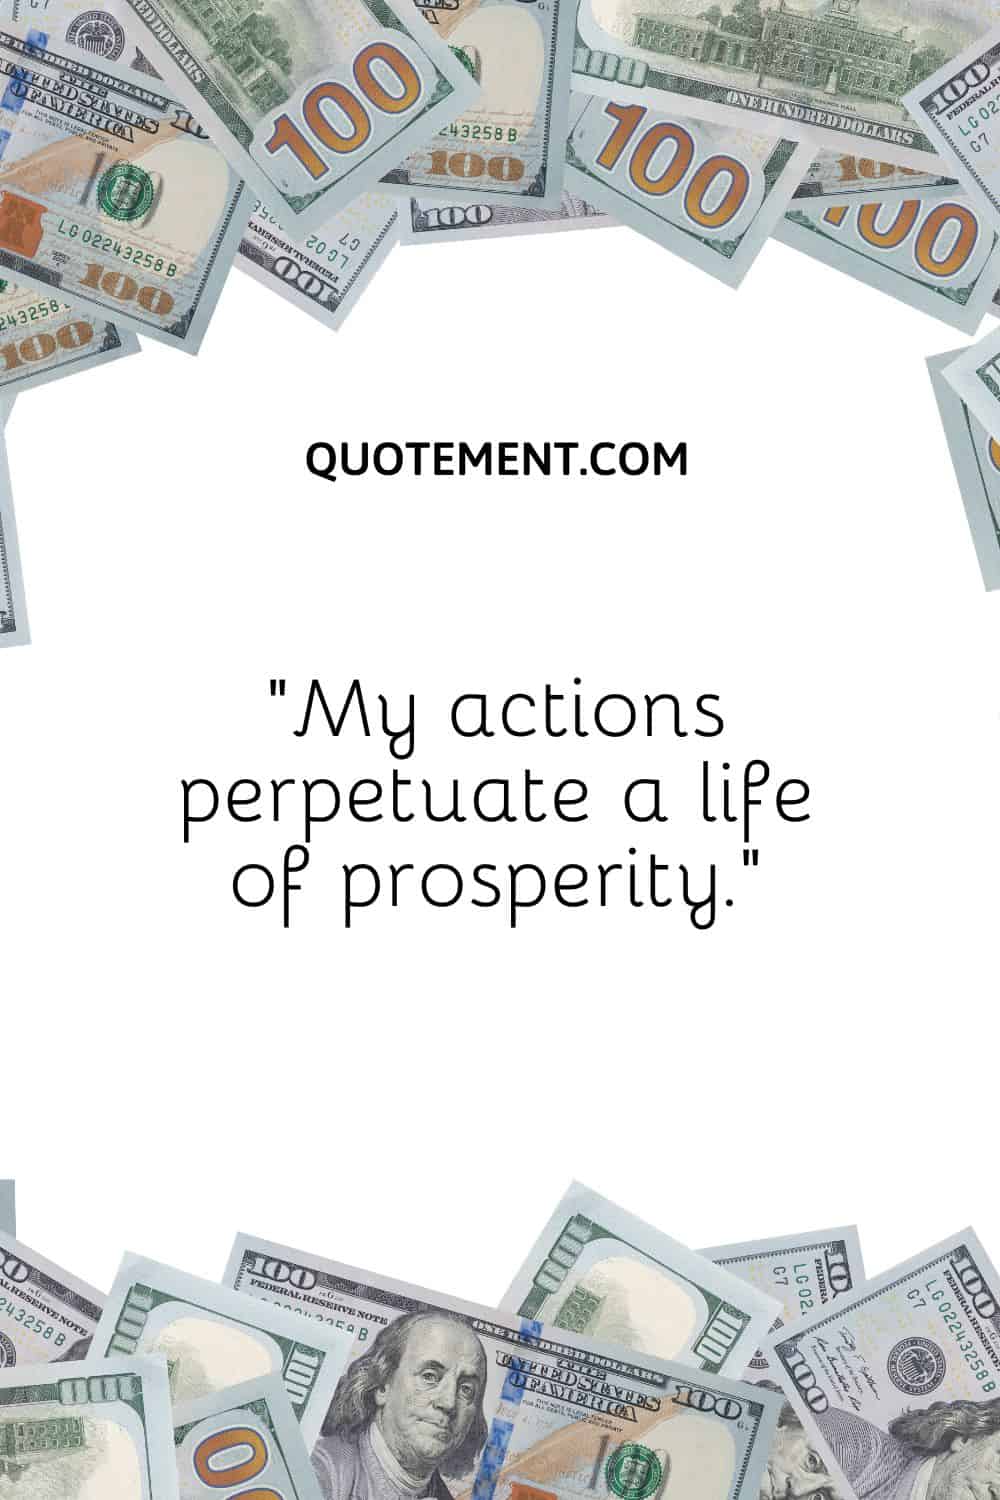 “My actions perpetuate a life of prosperity.”